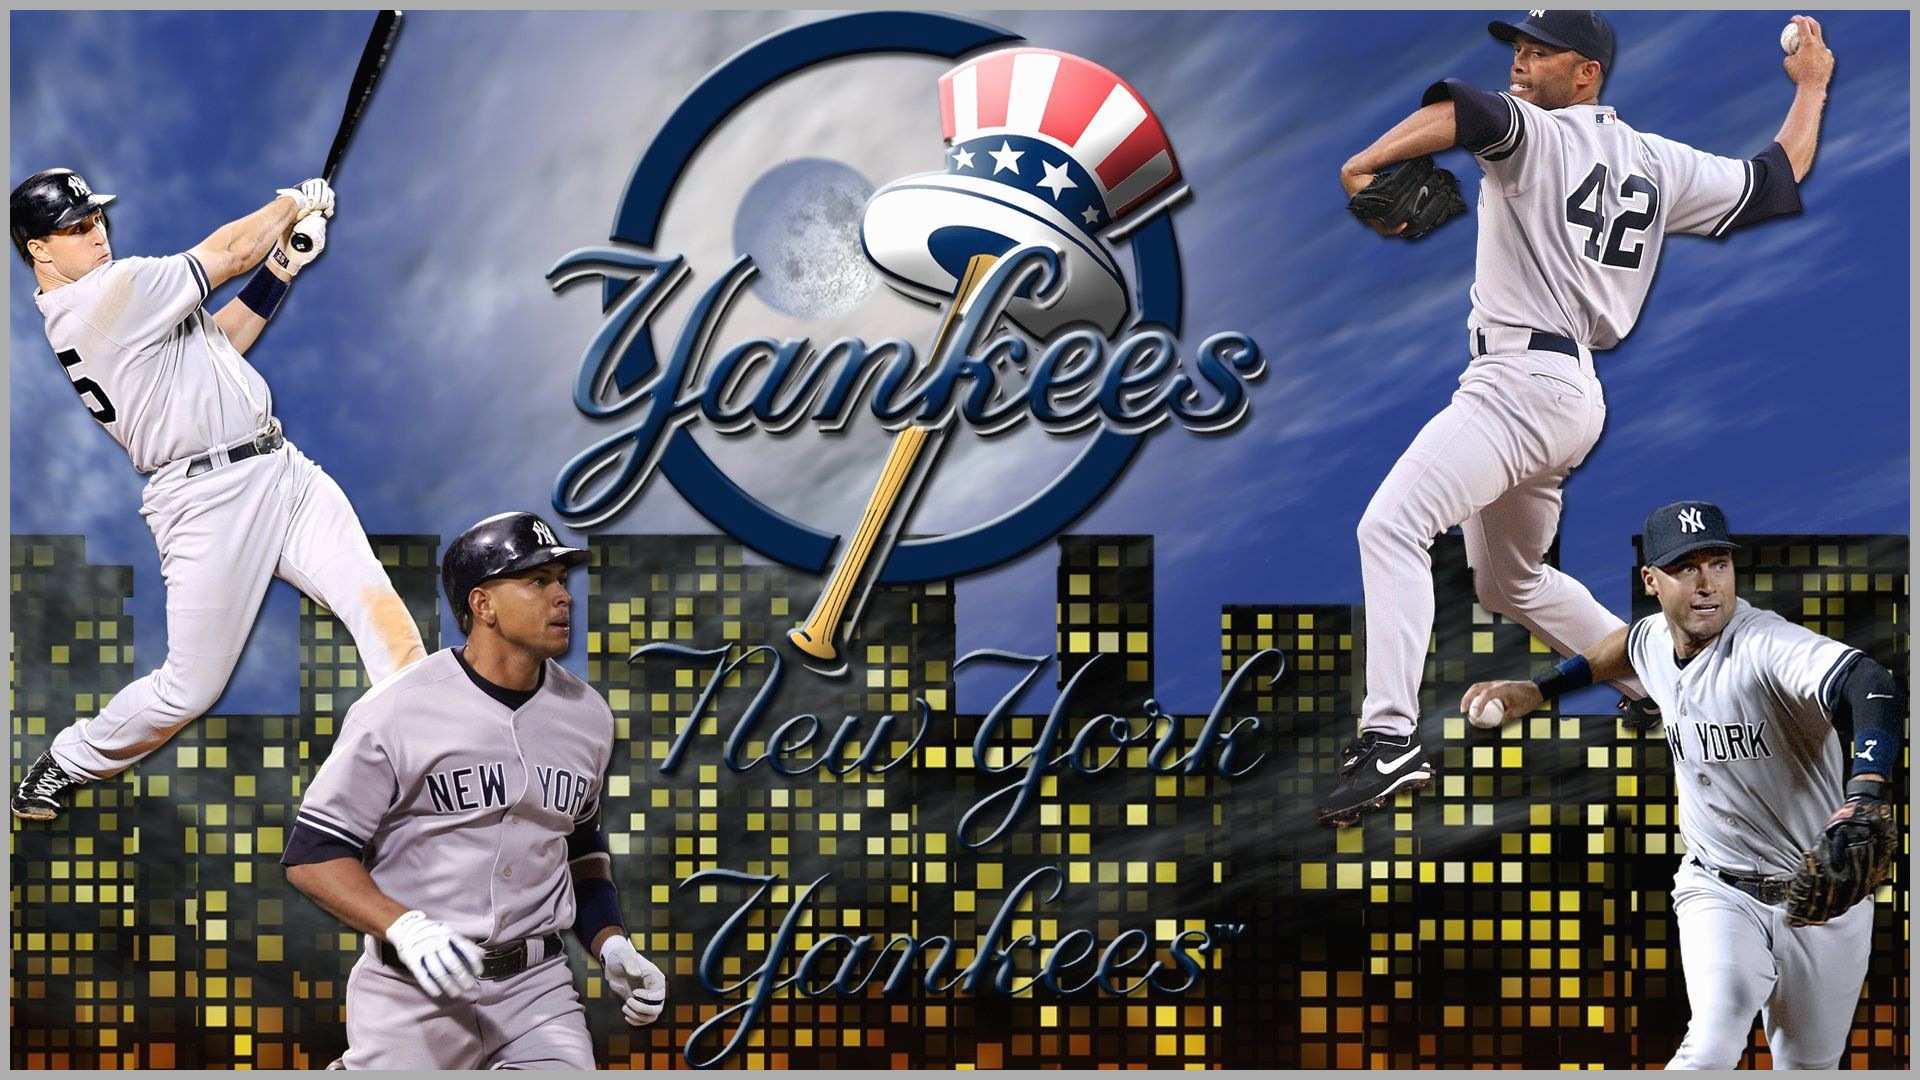 New York Yankees Wallpaper Best Of By Wicked Shadows